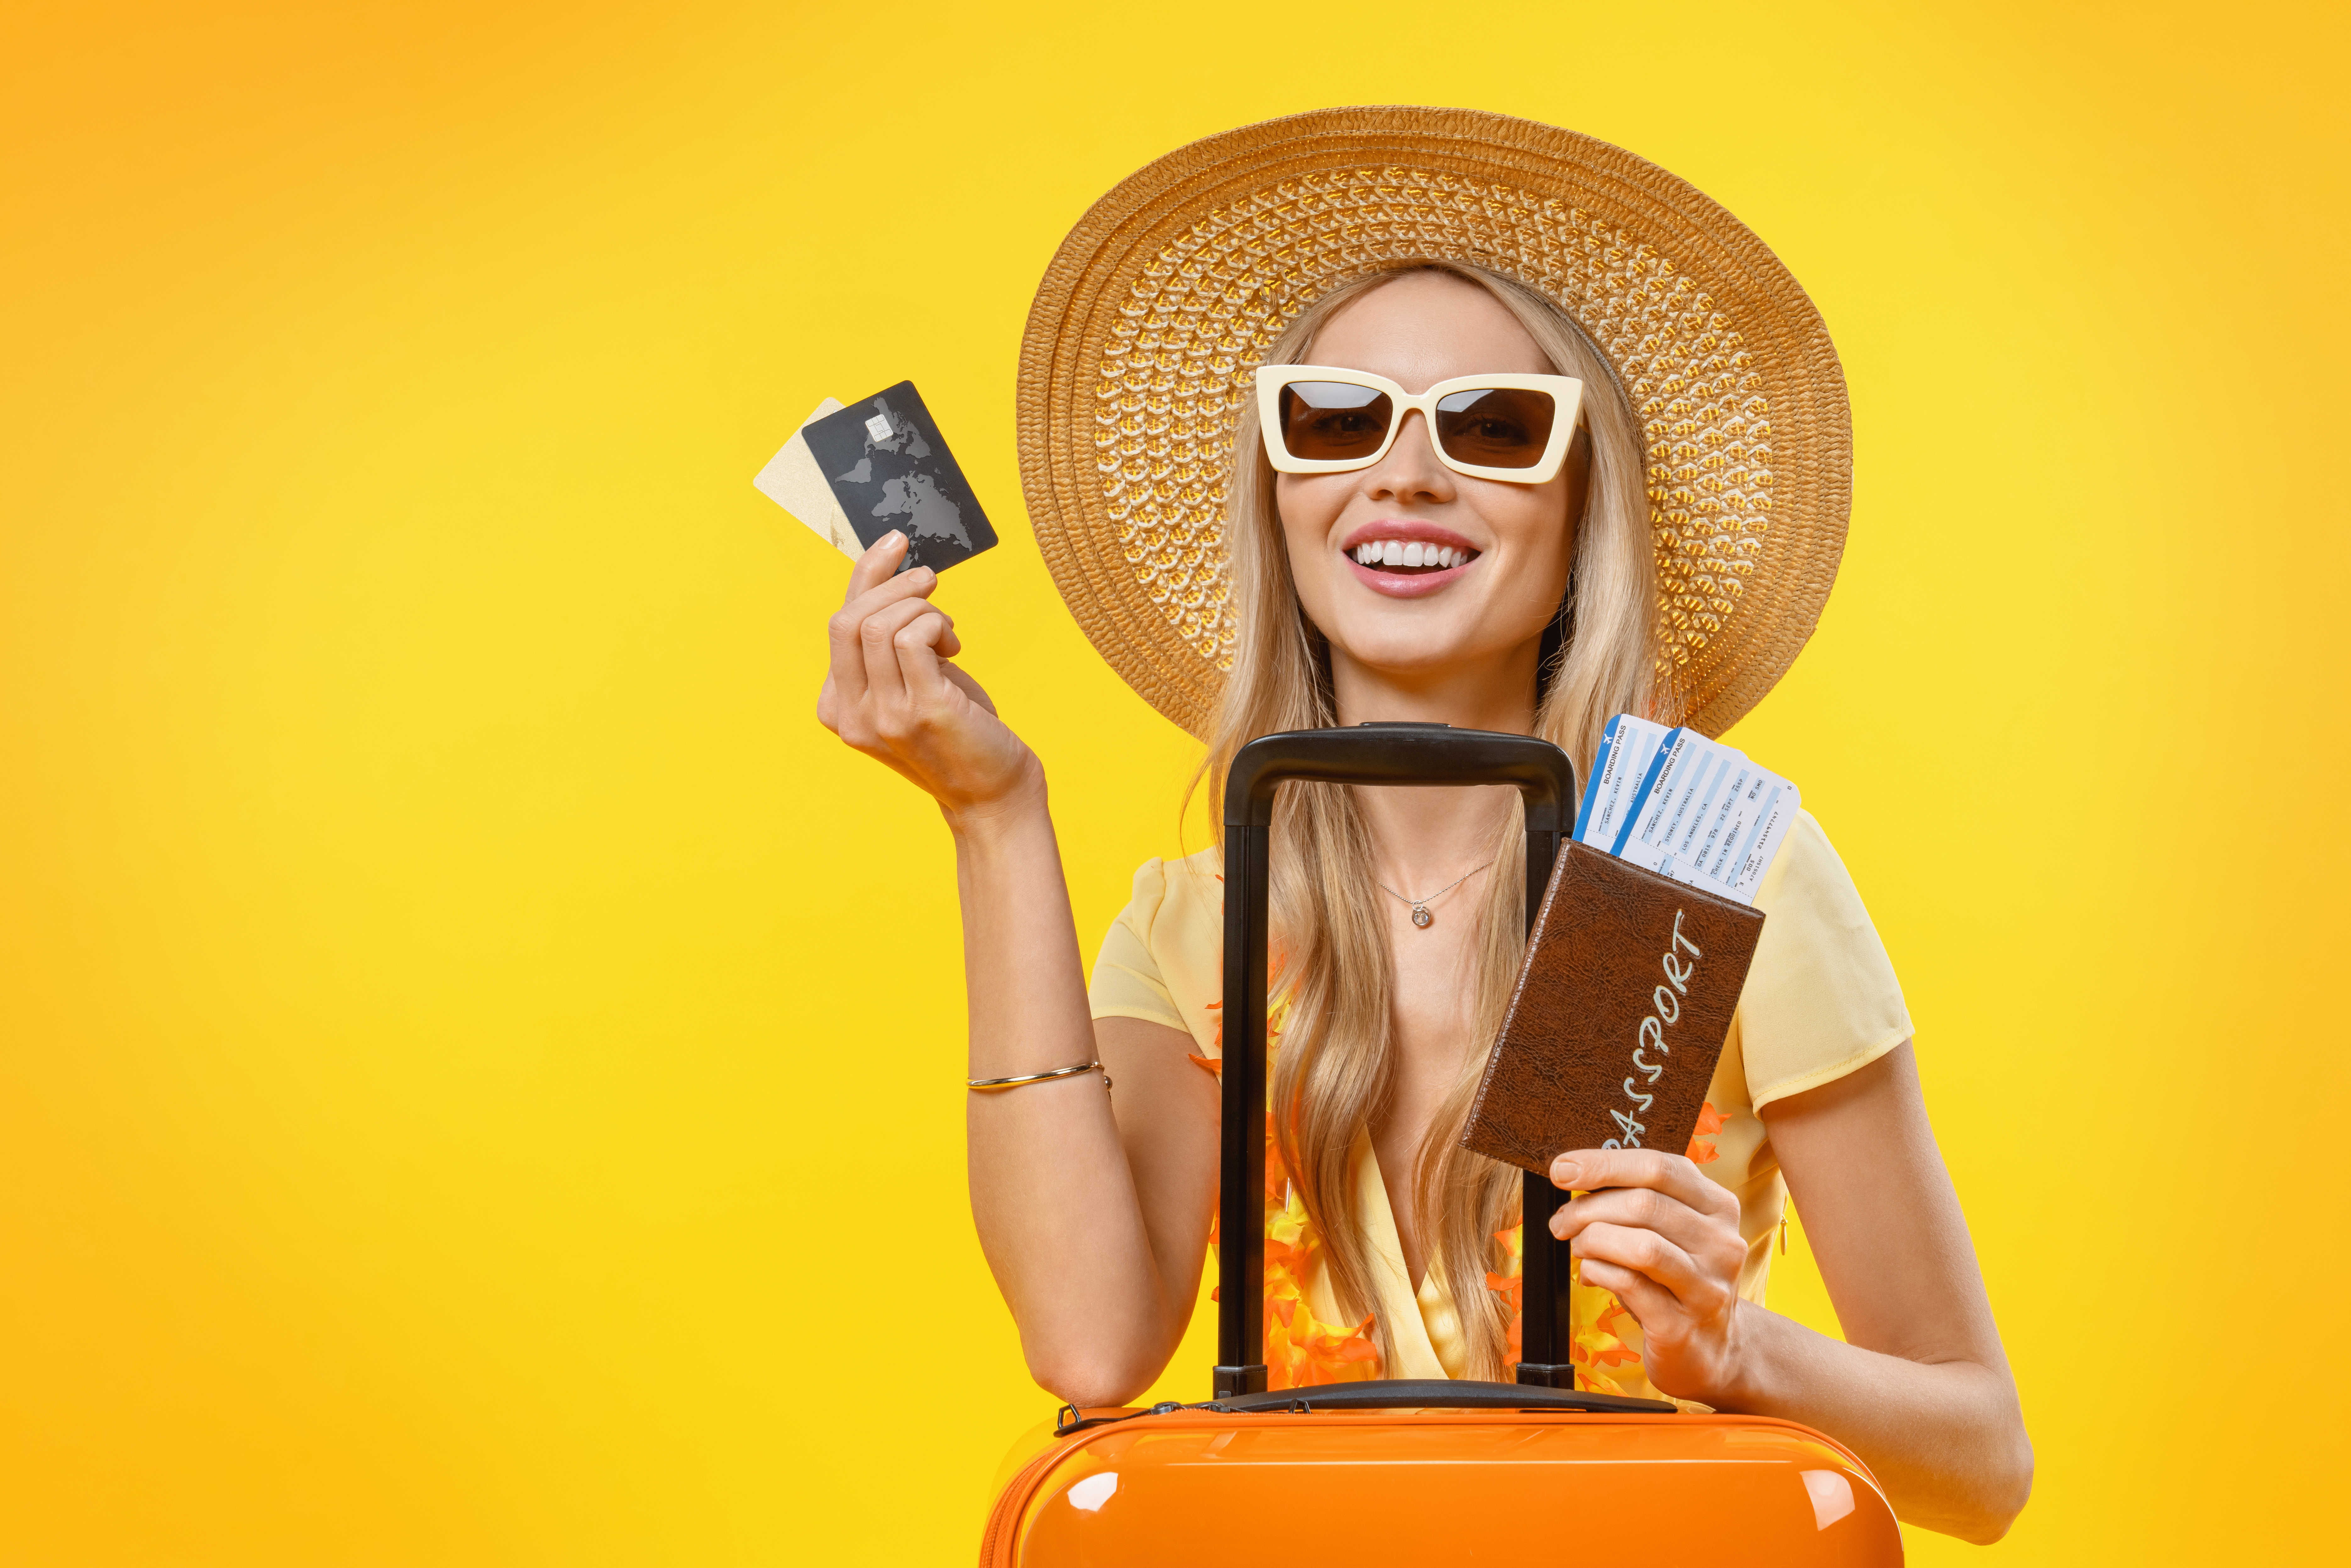 Check out our list of the best four travel rewards credit cards! Source: Adobe Stock